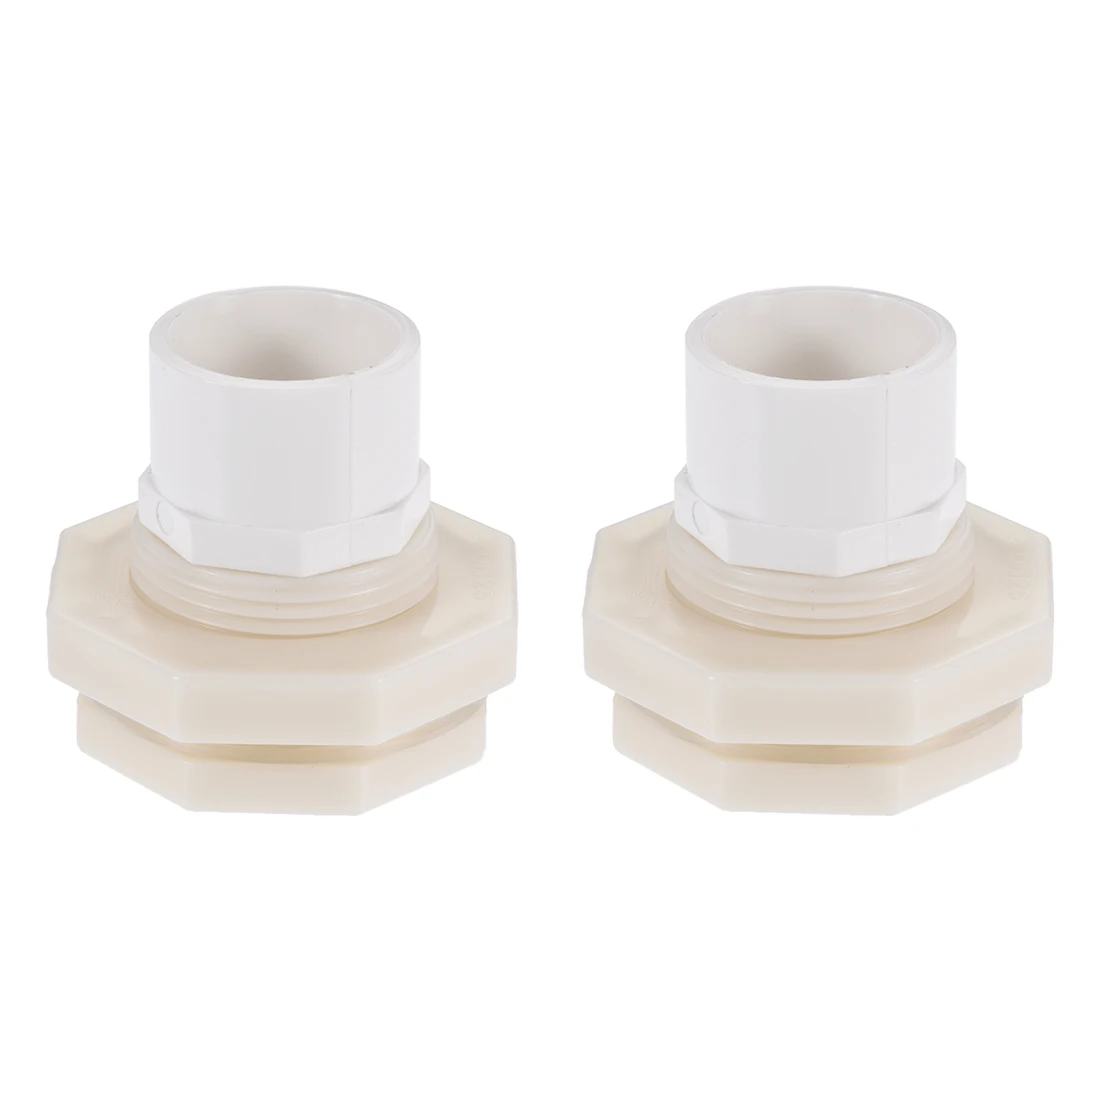 

Uxcell Bulkhead Fitting, G1 Female 1.73" Male, with Silicone Gasket and Pipe Connector, for Water Tanks, PVC, White, 2Pcs